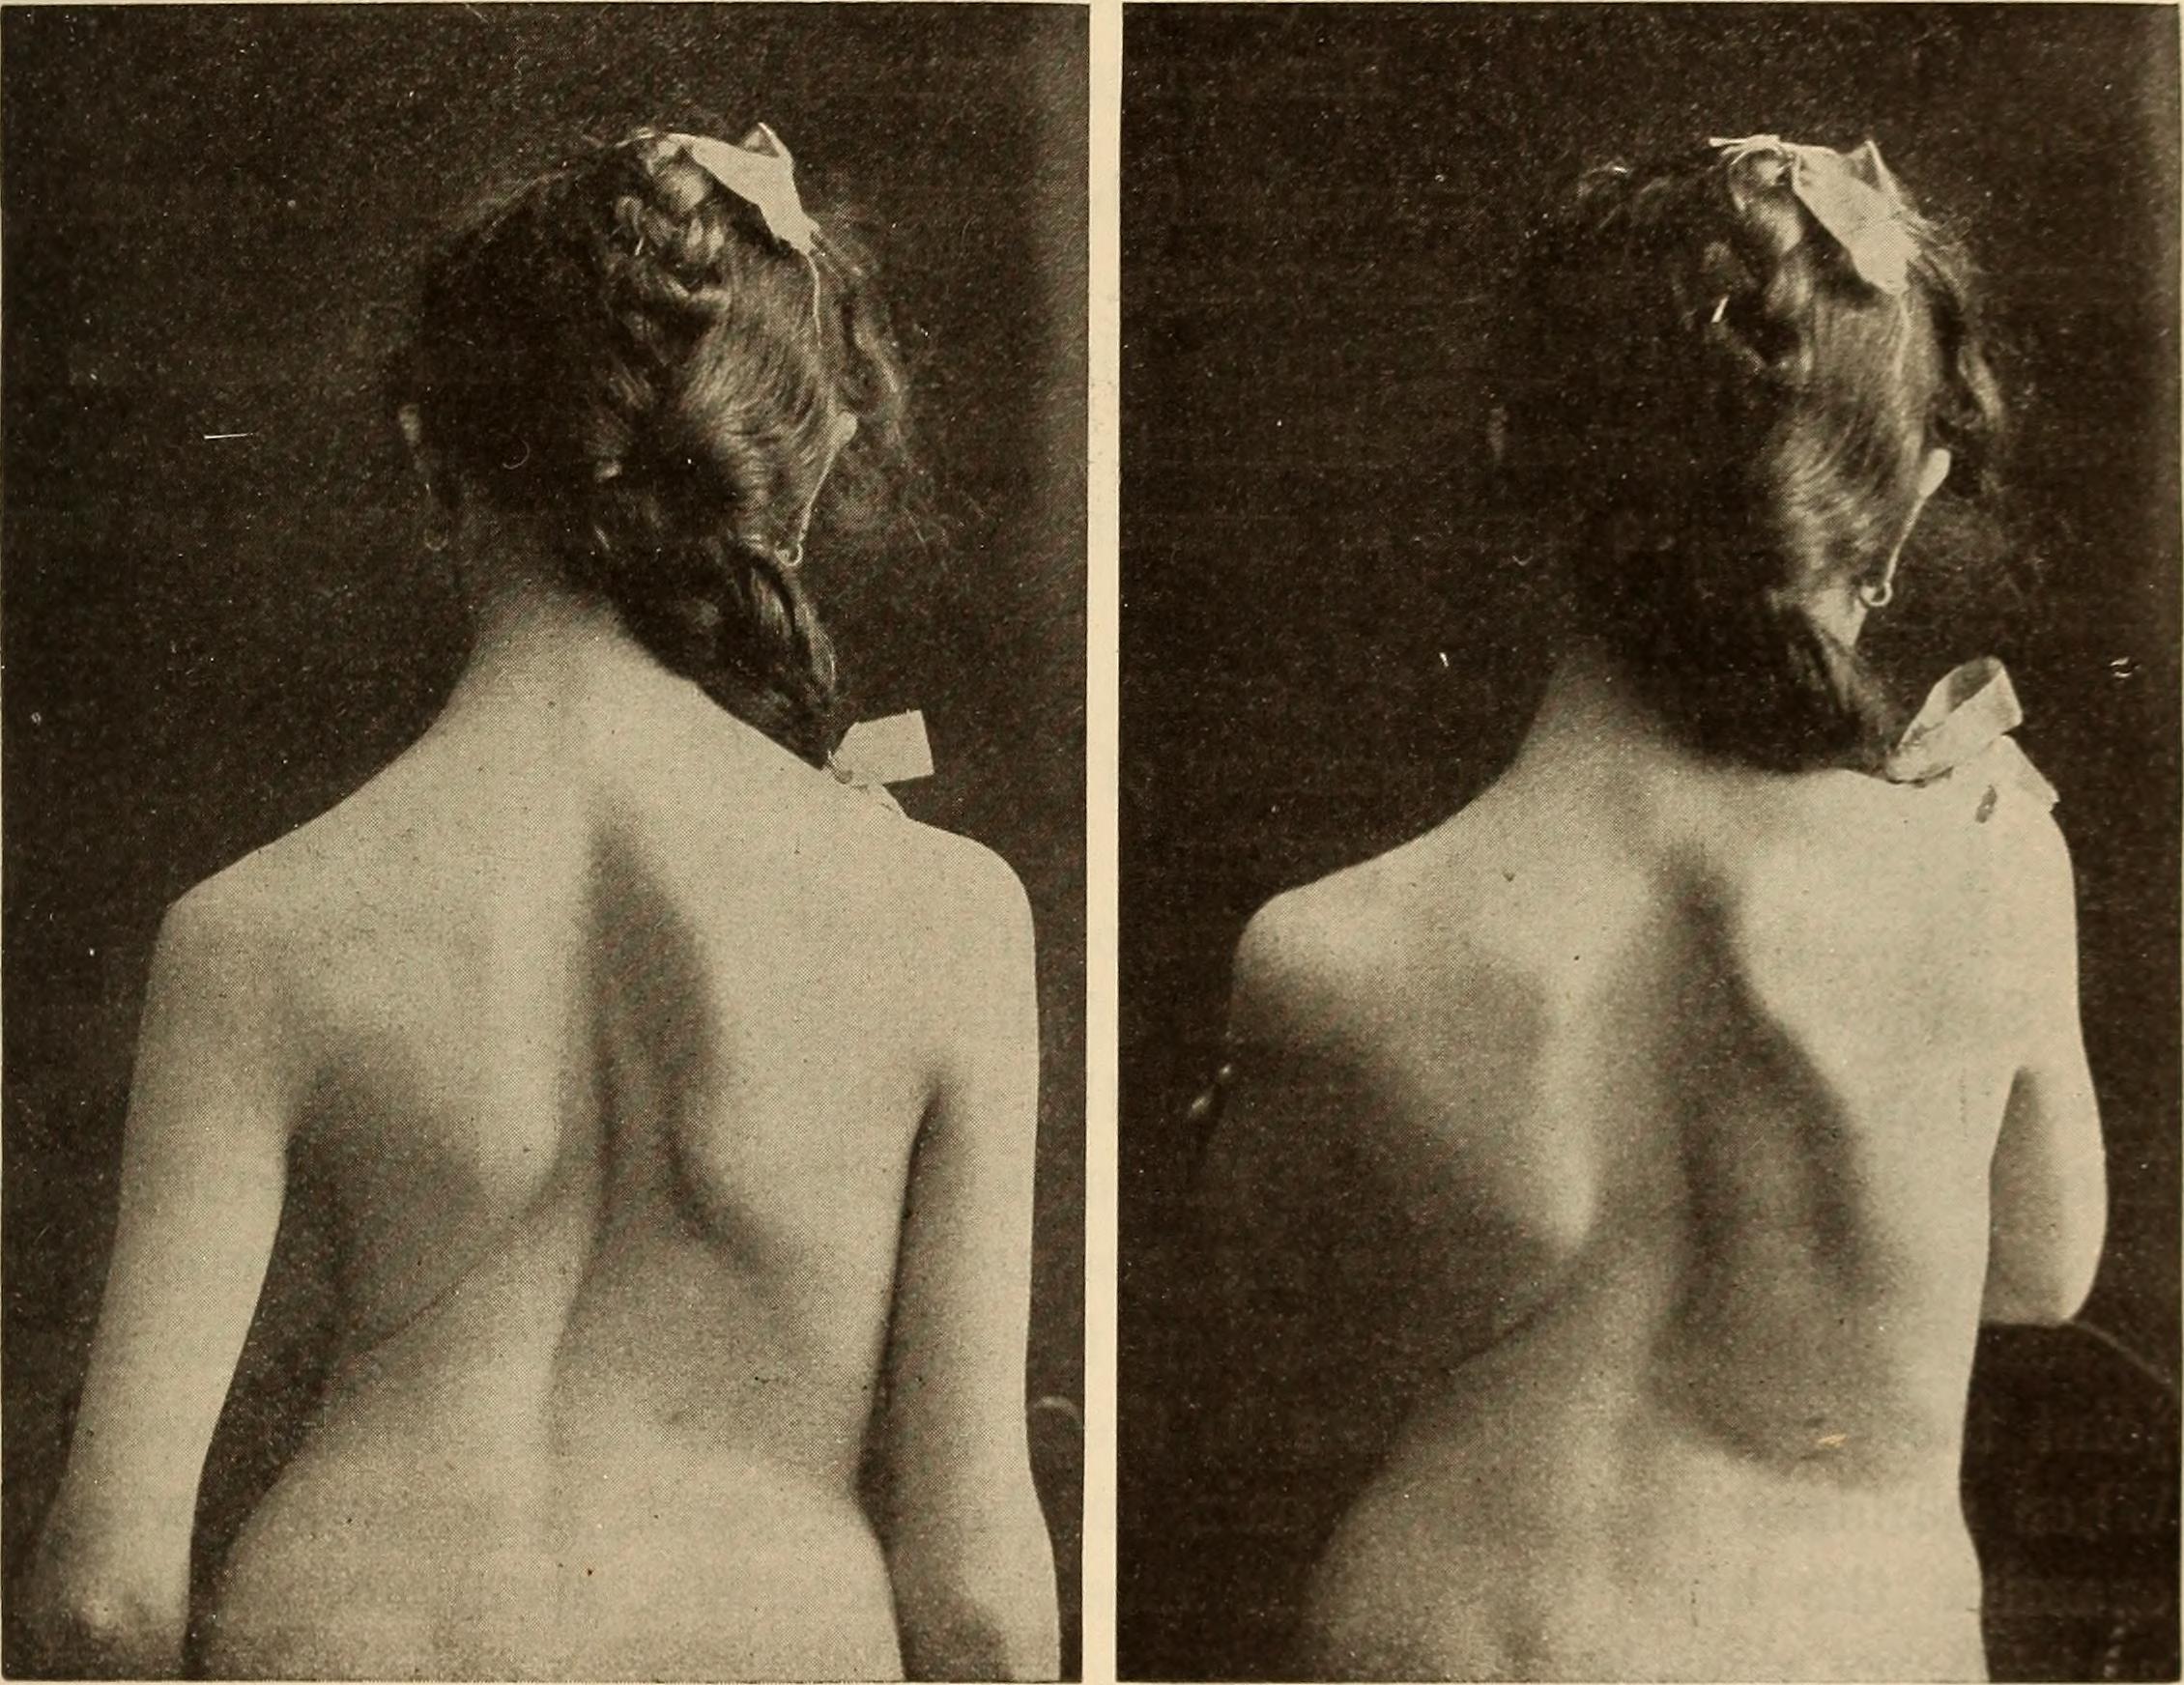 File:Scoliosis clinical pic.jpg